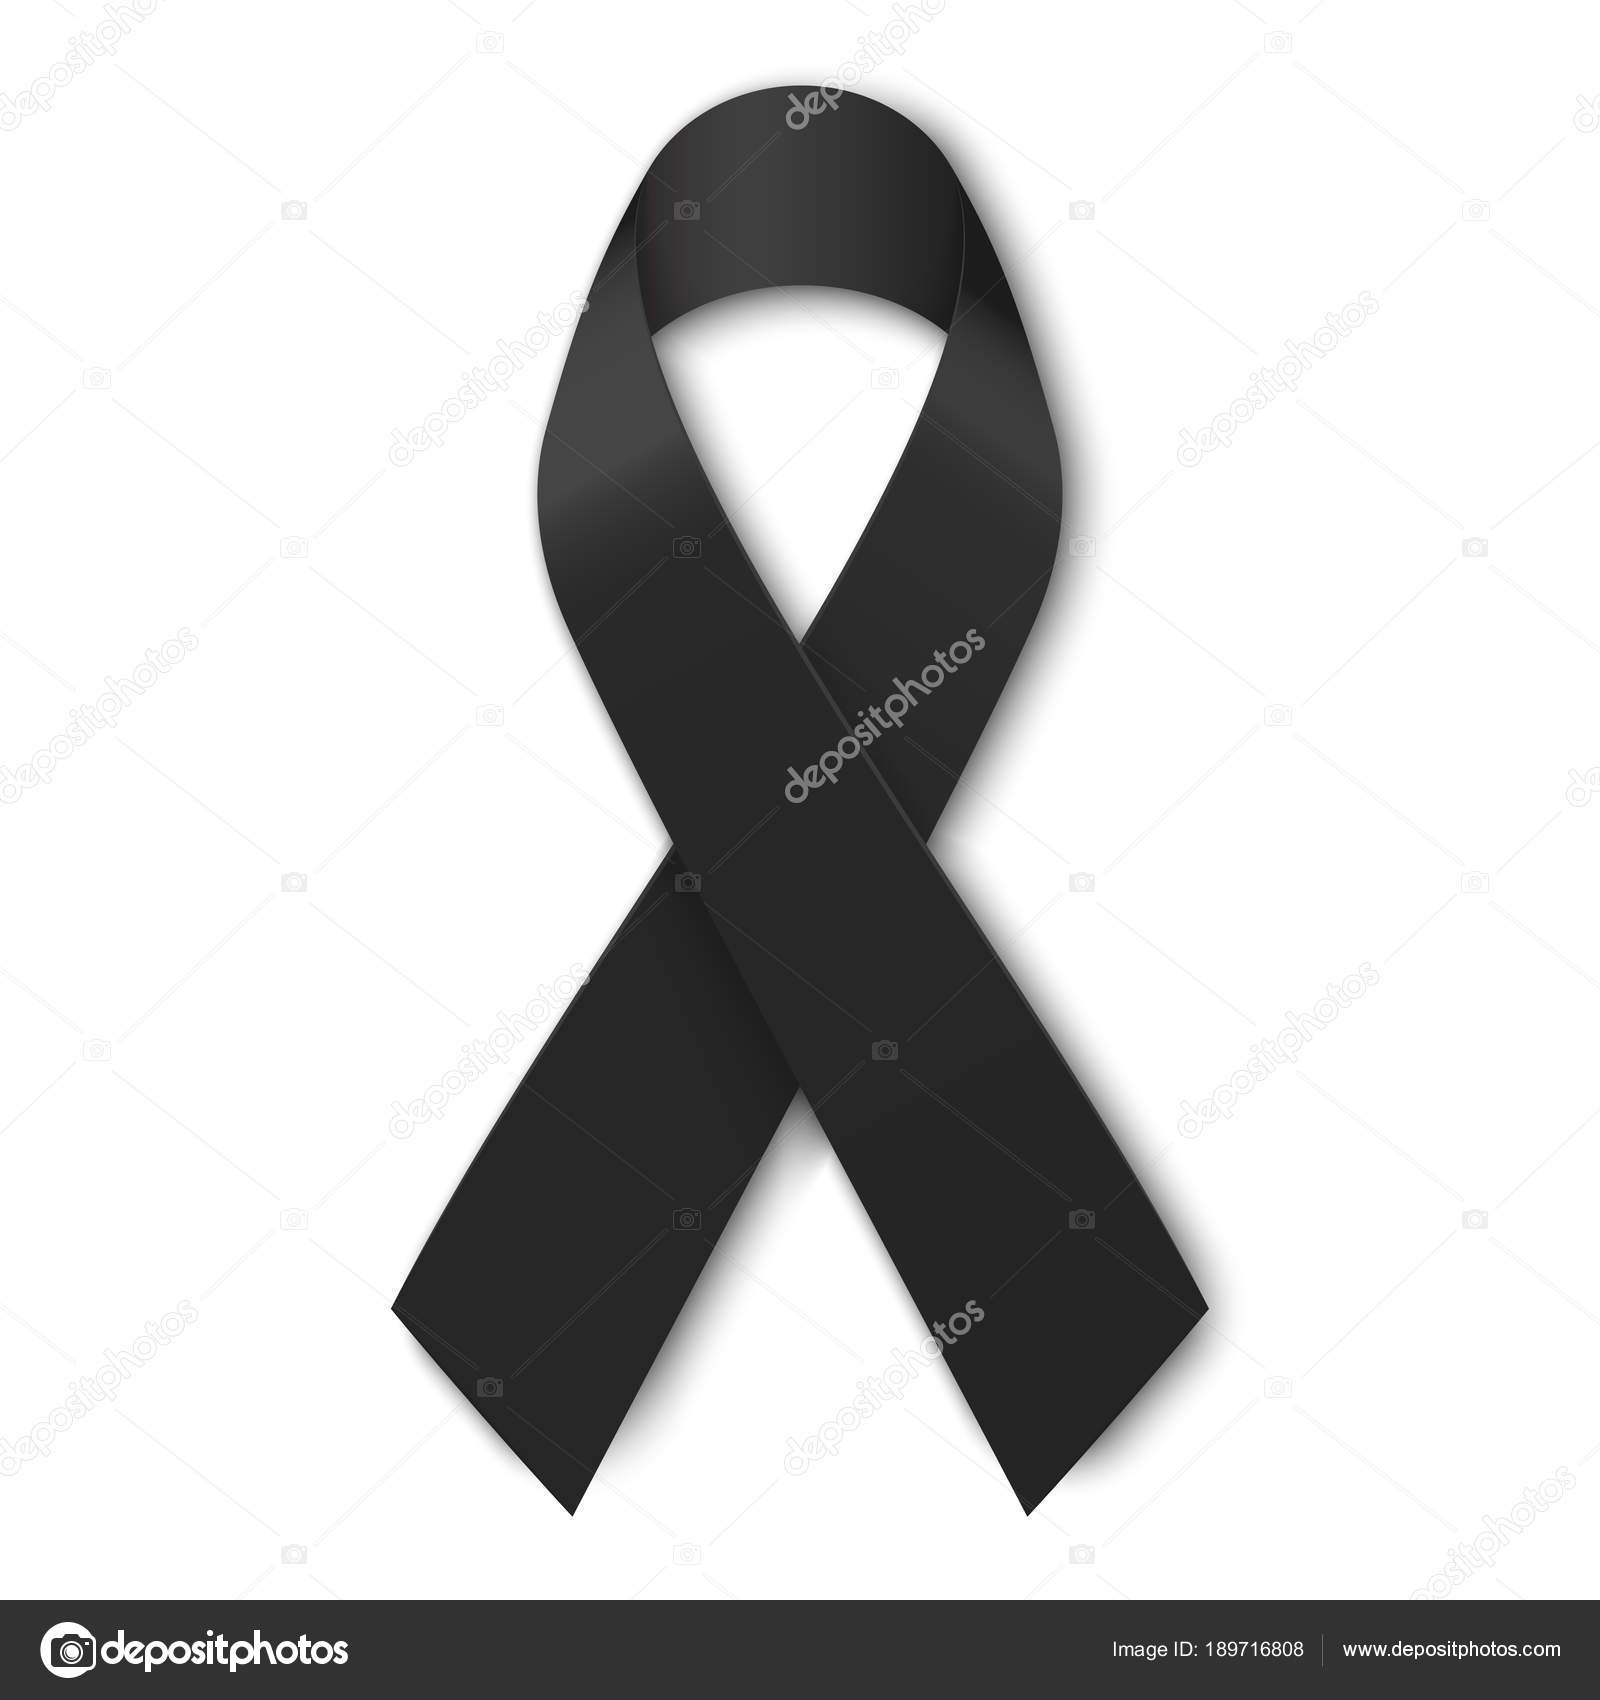 7 300 Mourning Vectors Royalty Free Vector Mourning Images Depositphotos